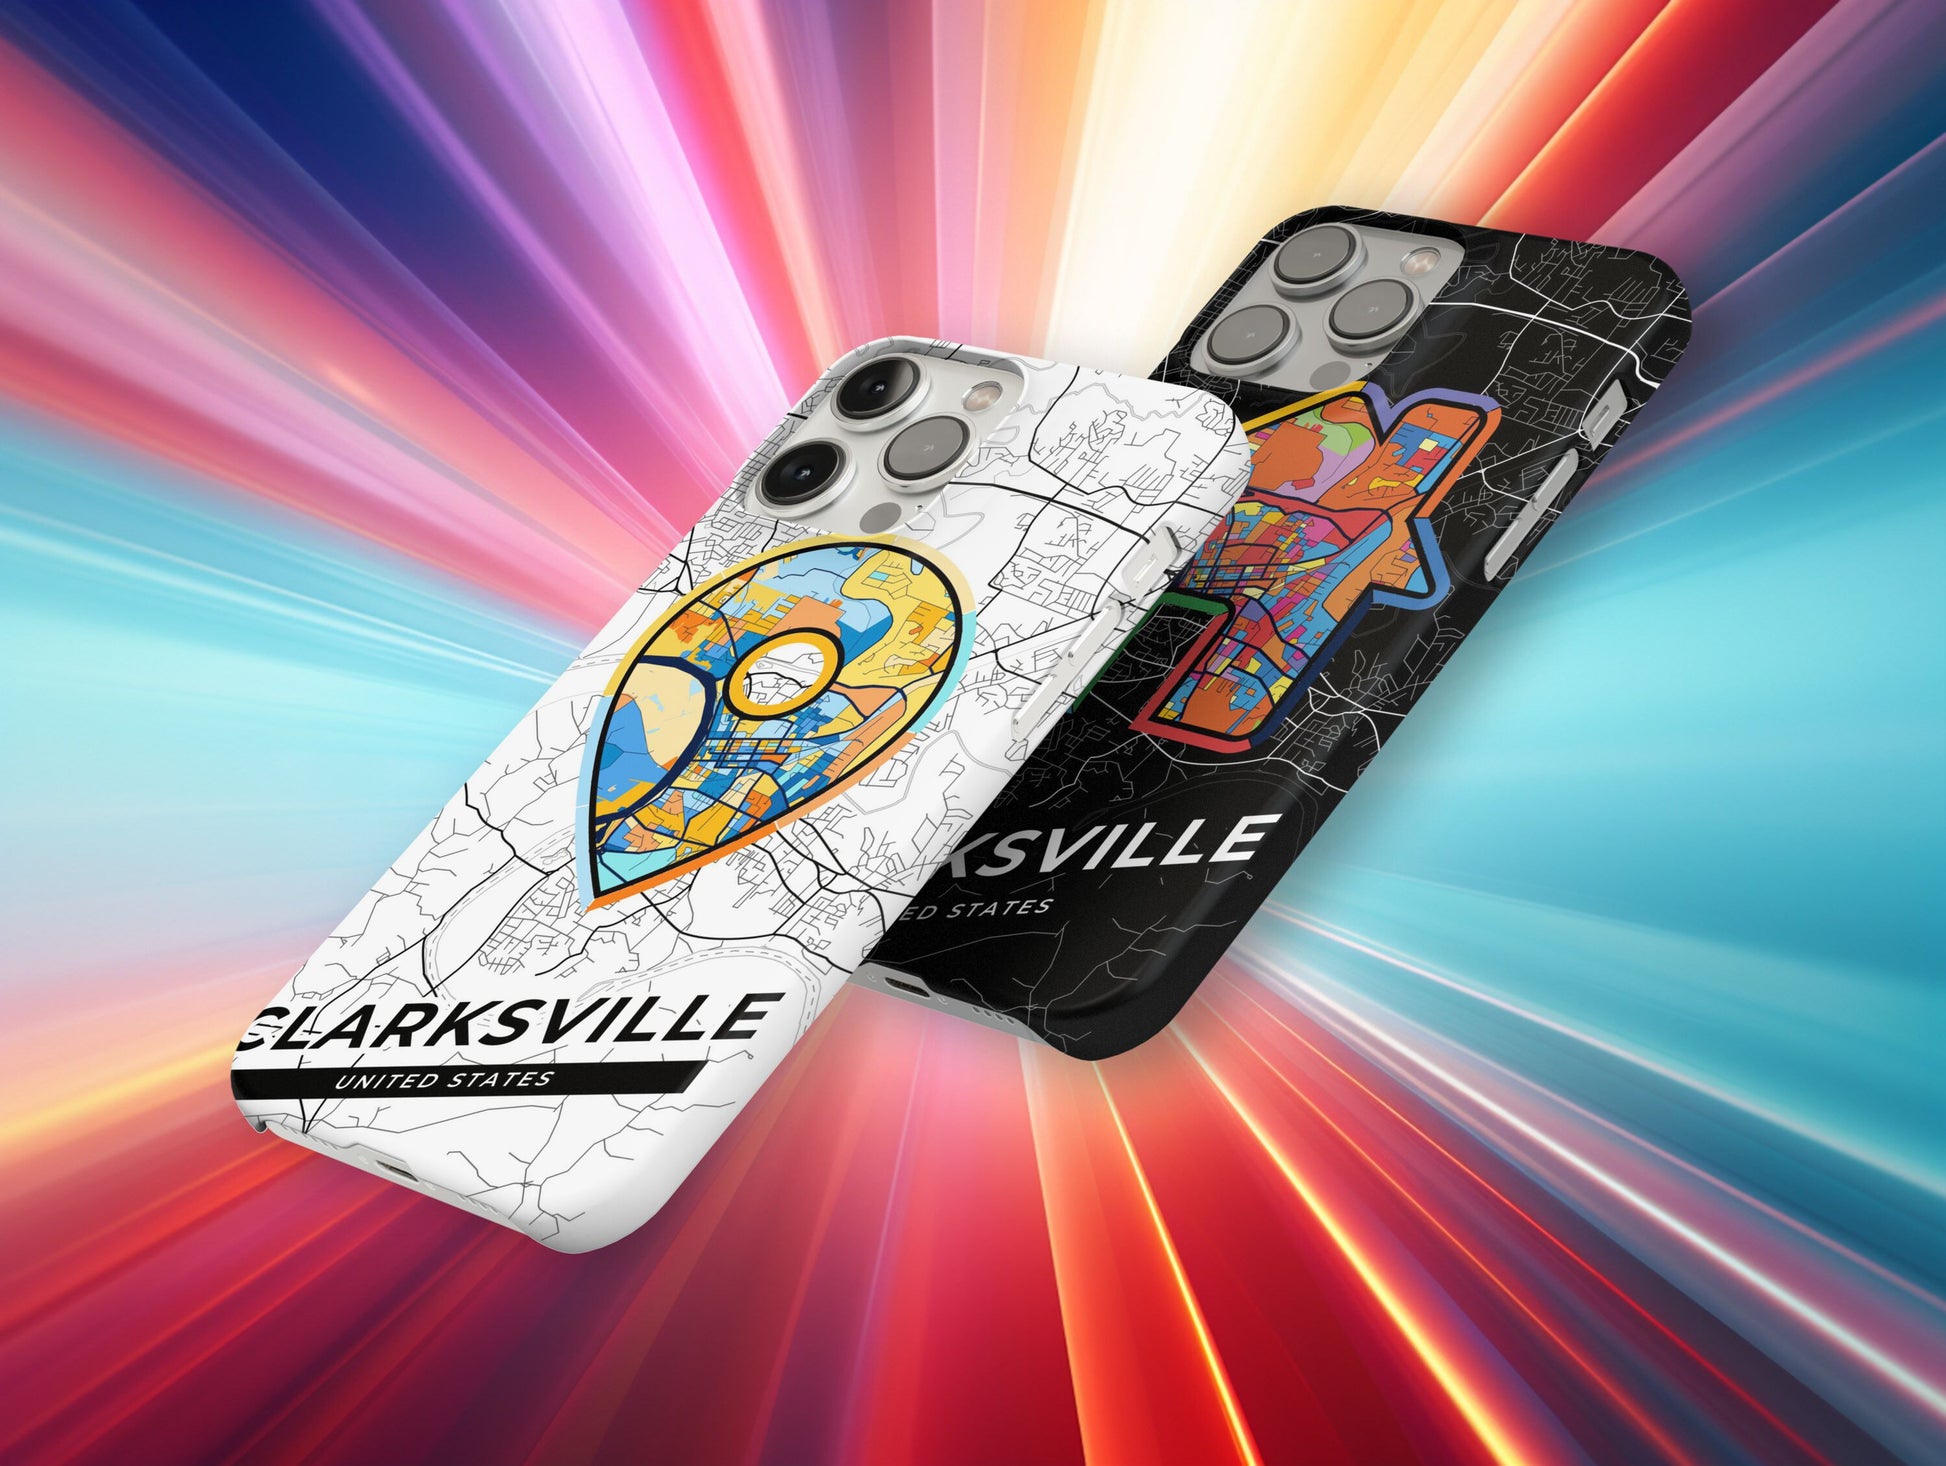 Clarksville Tennessee slim phone case with colorful icon. Birthday, wedding or housewarming gift. Couple match cases.